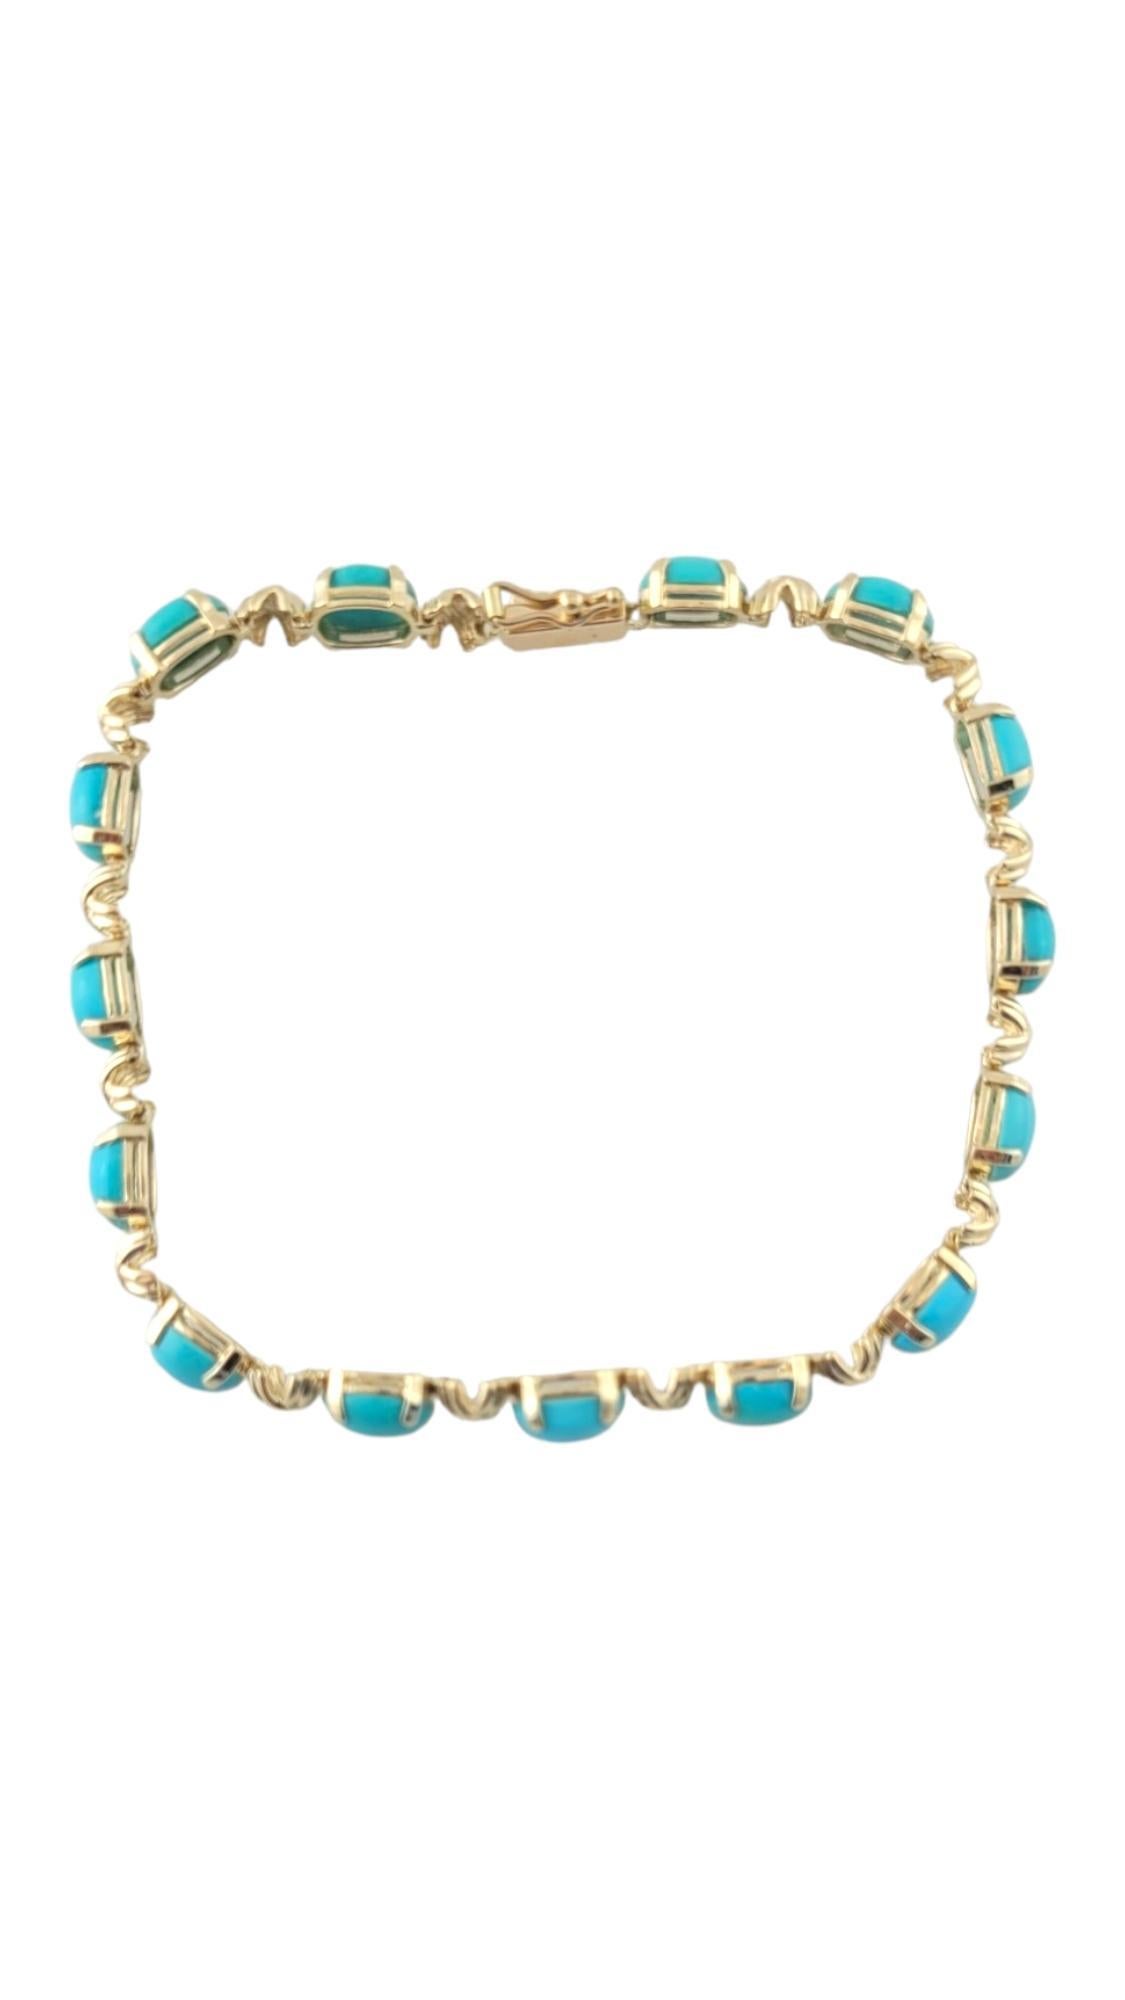 Vintage 14K Yellow Gold Turquoise Bracelet

This bracelet features 15 gorgeous turquoise stones all set in 14K yellow gold for a beautiful finish!

Size: 7.5